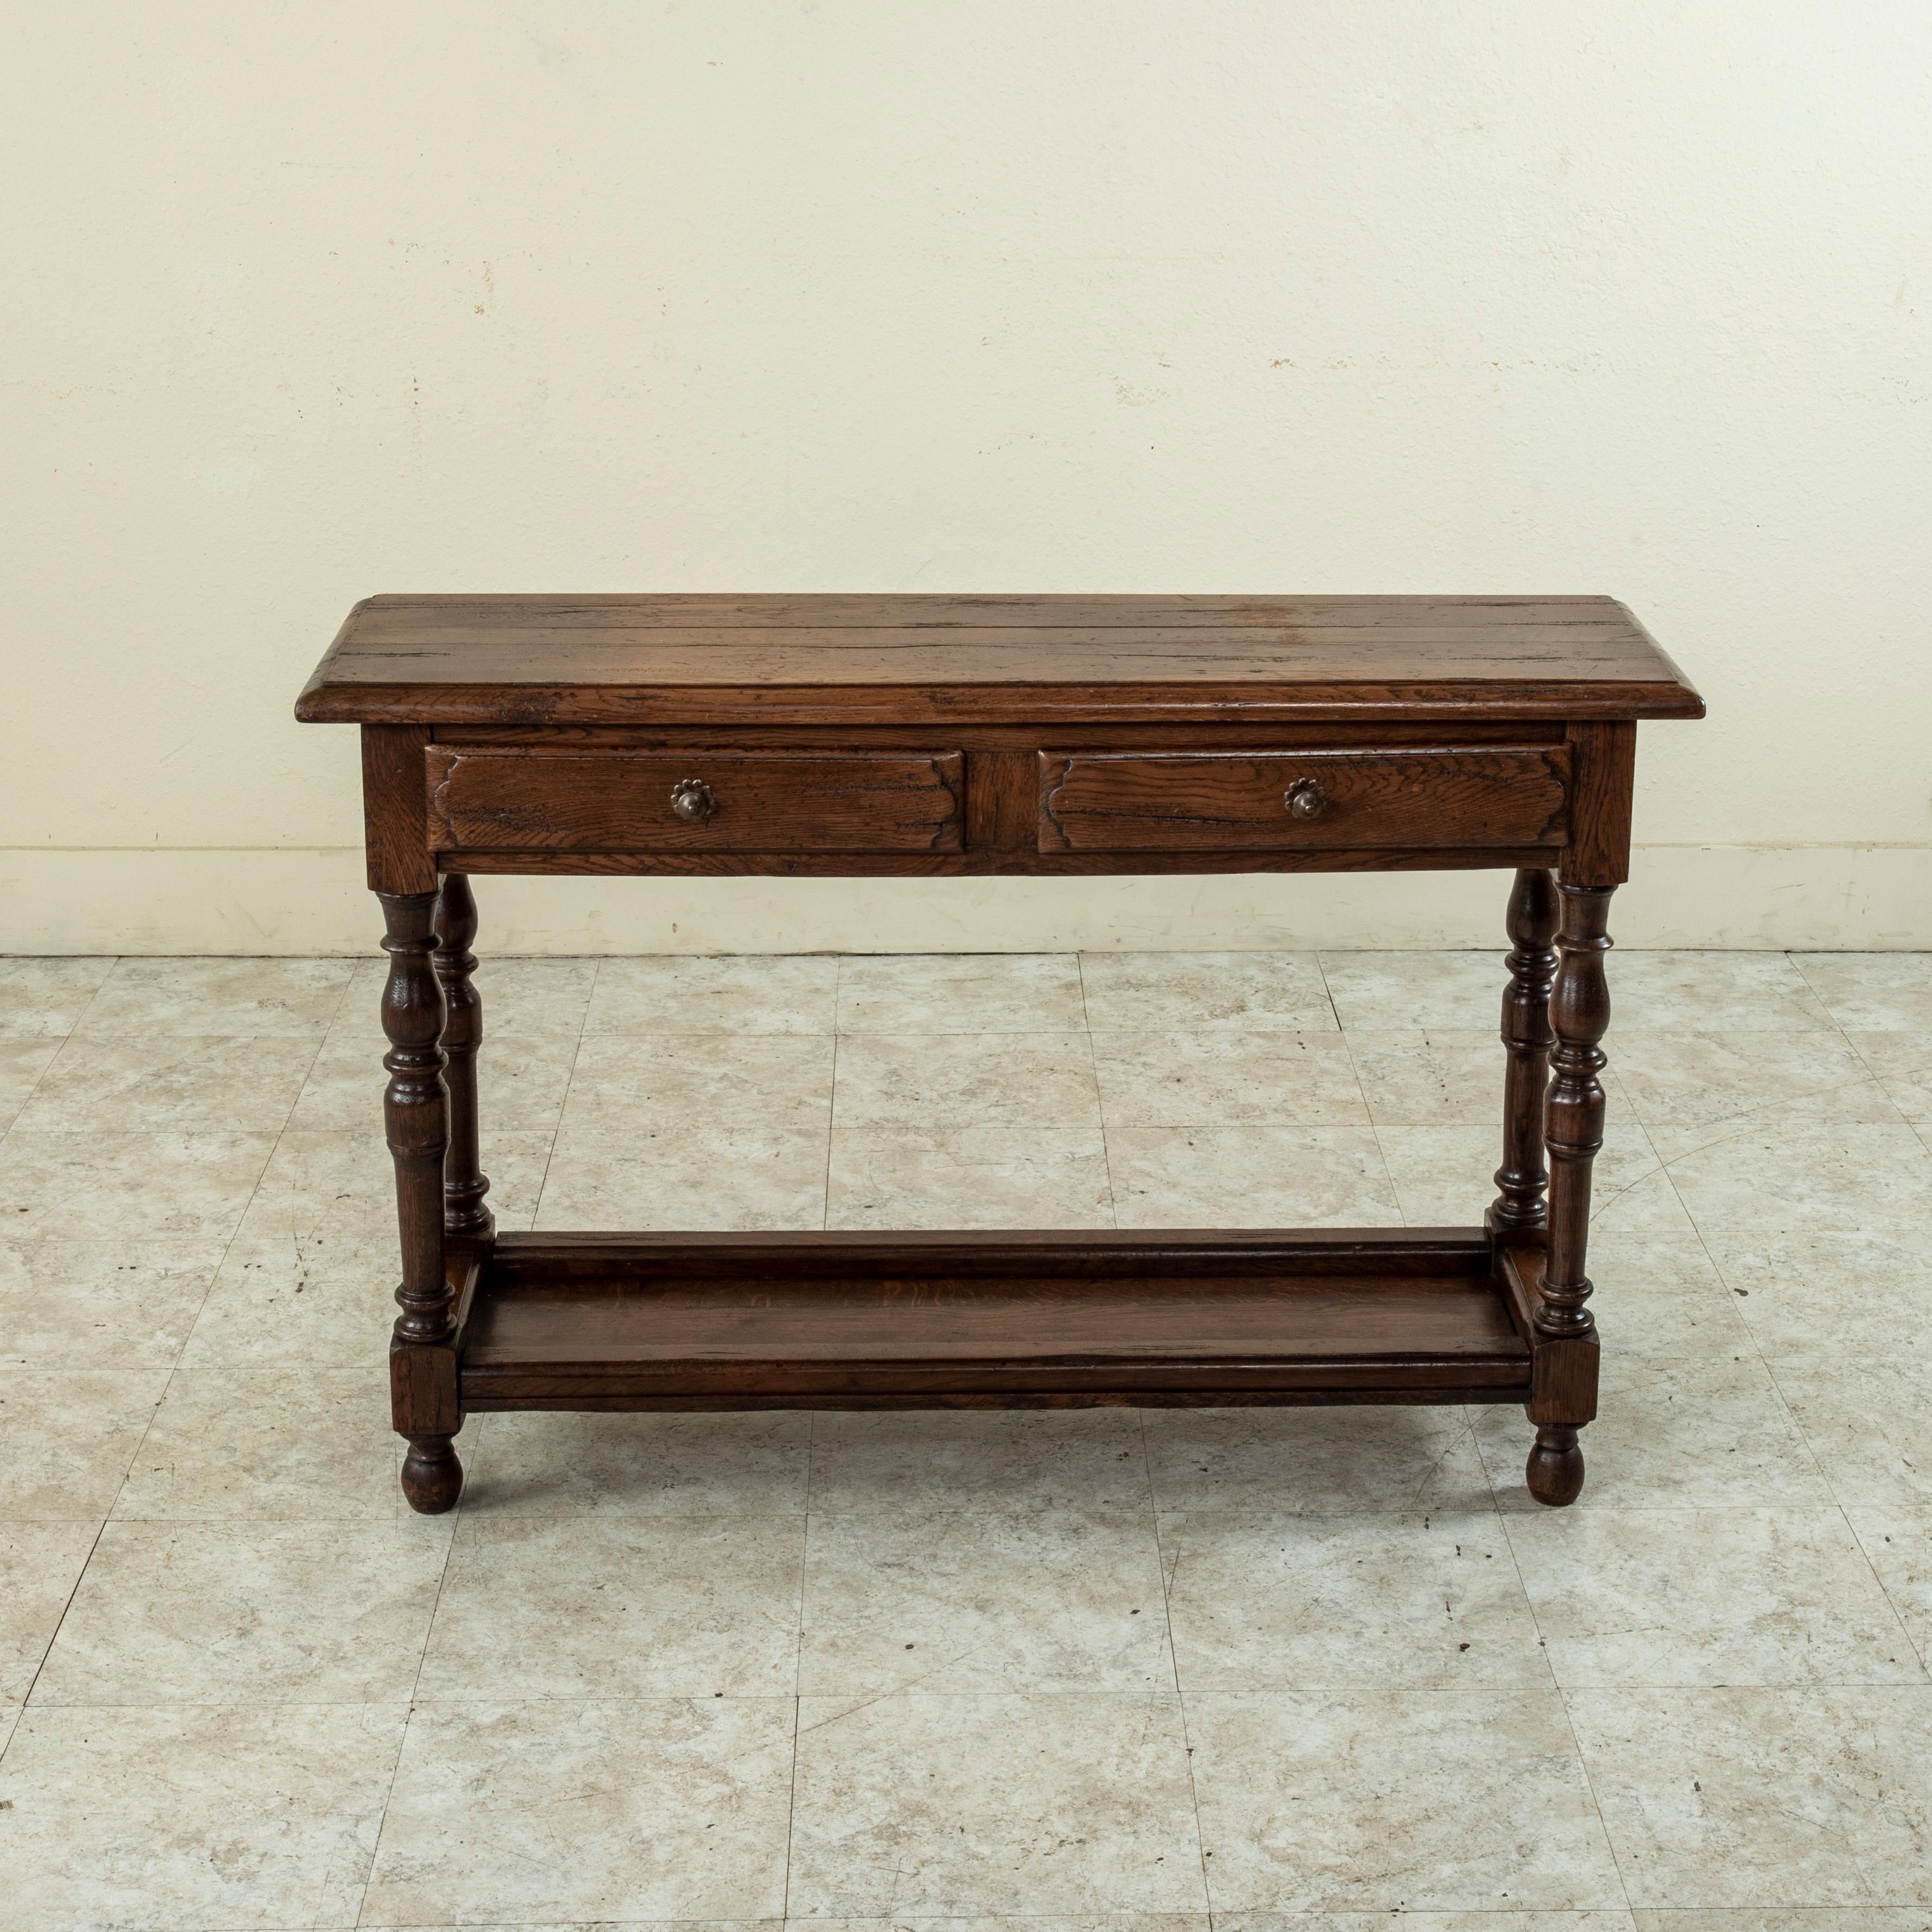 Found in the region of Normandy, France, this Mid-20th Century oak console table features a beveled top and turned legs. Two drawers fit into the apron and are fitted with iron drawer pulls. The legs are joined by a lower shelf that provides